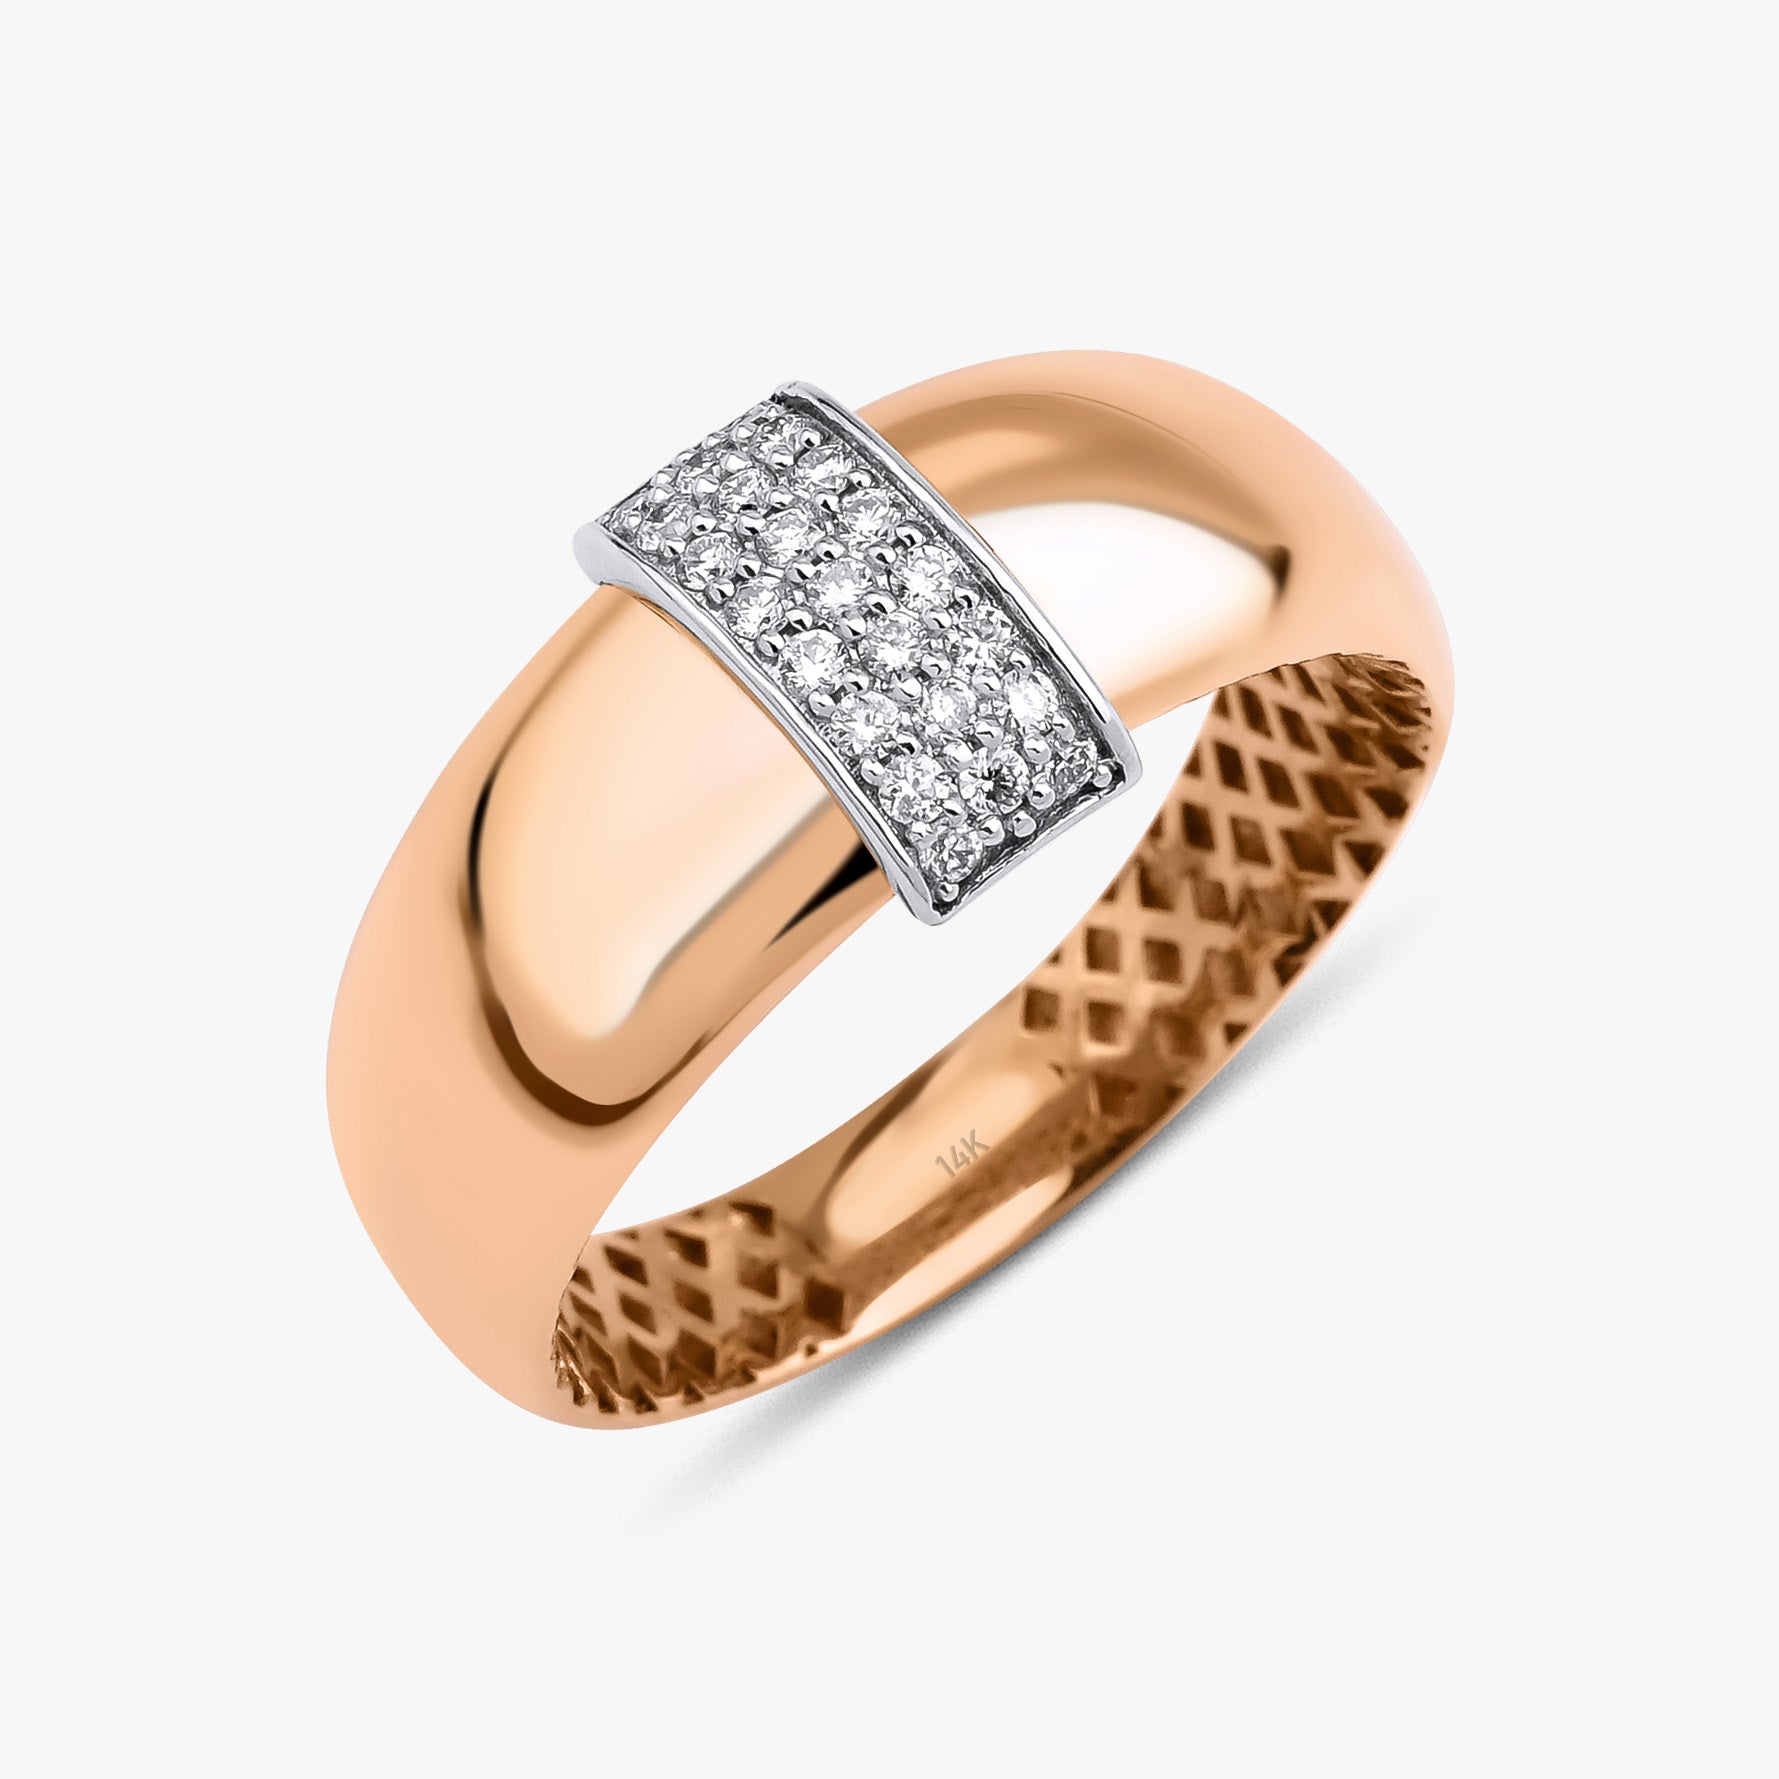 Pave Set Diamond Dome Ring in 14K Gold